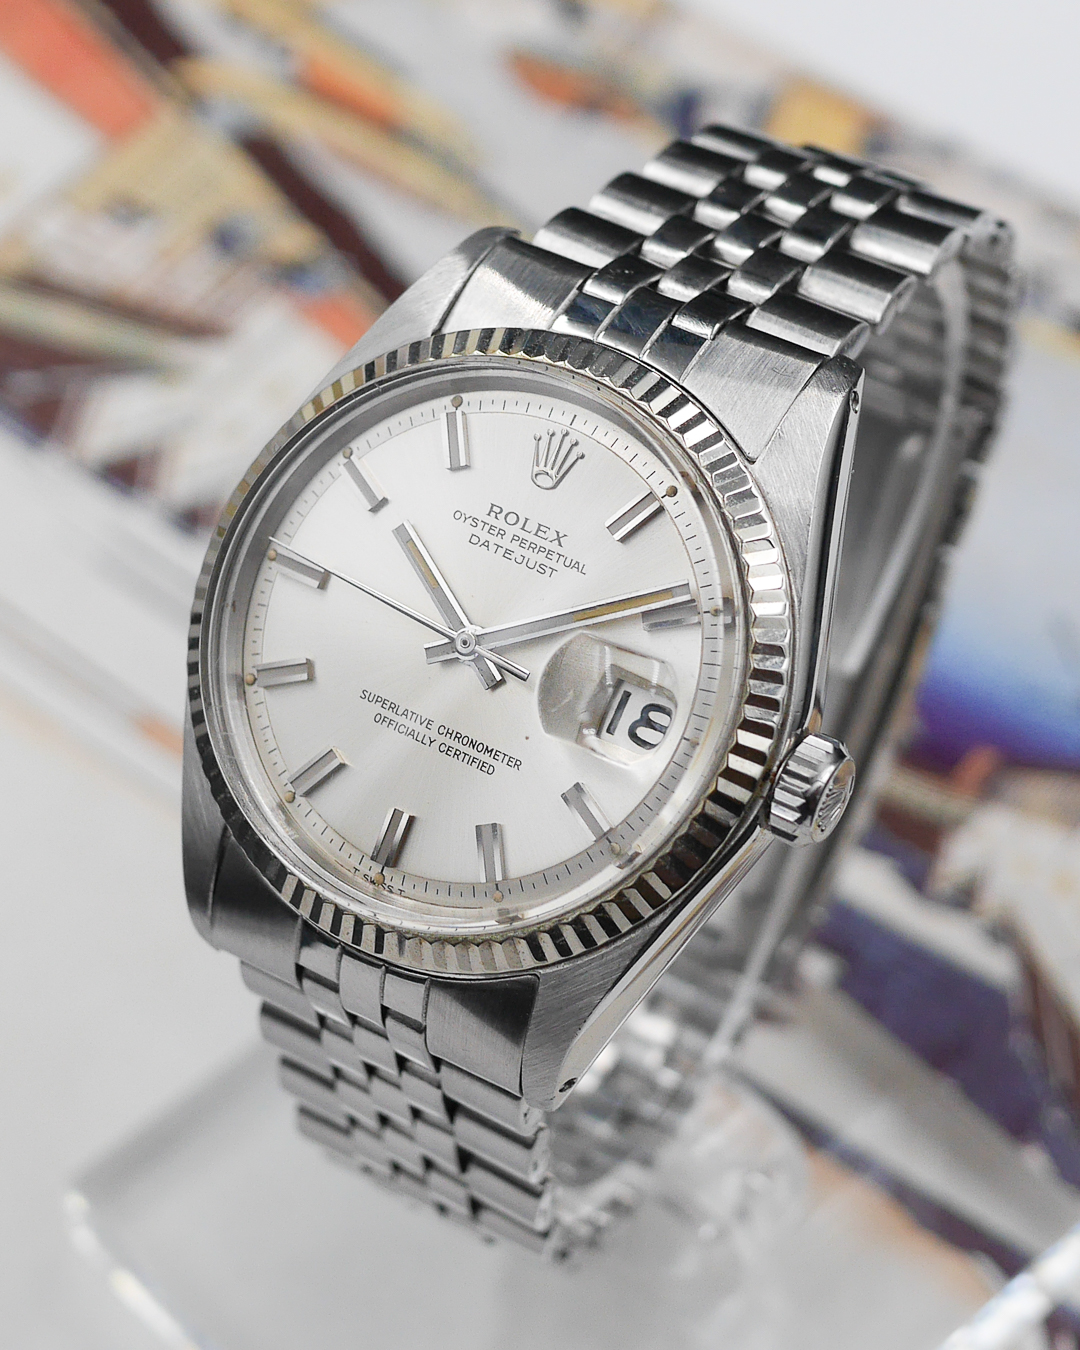 1970 Rolex Oyster Perpetual Datejust 1601 Wide Boy - Sabiwatches